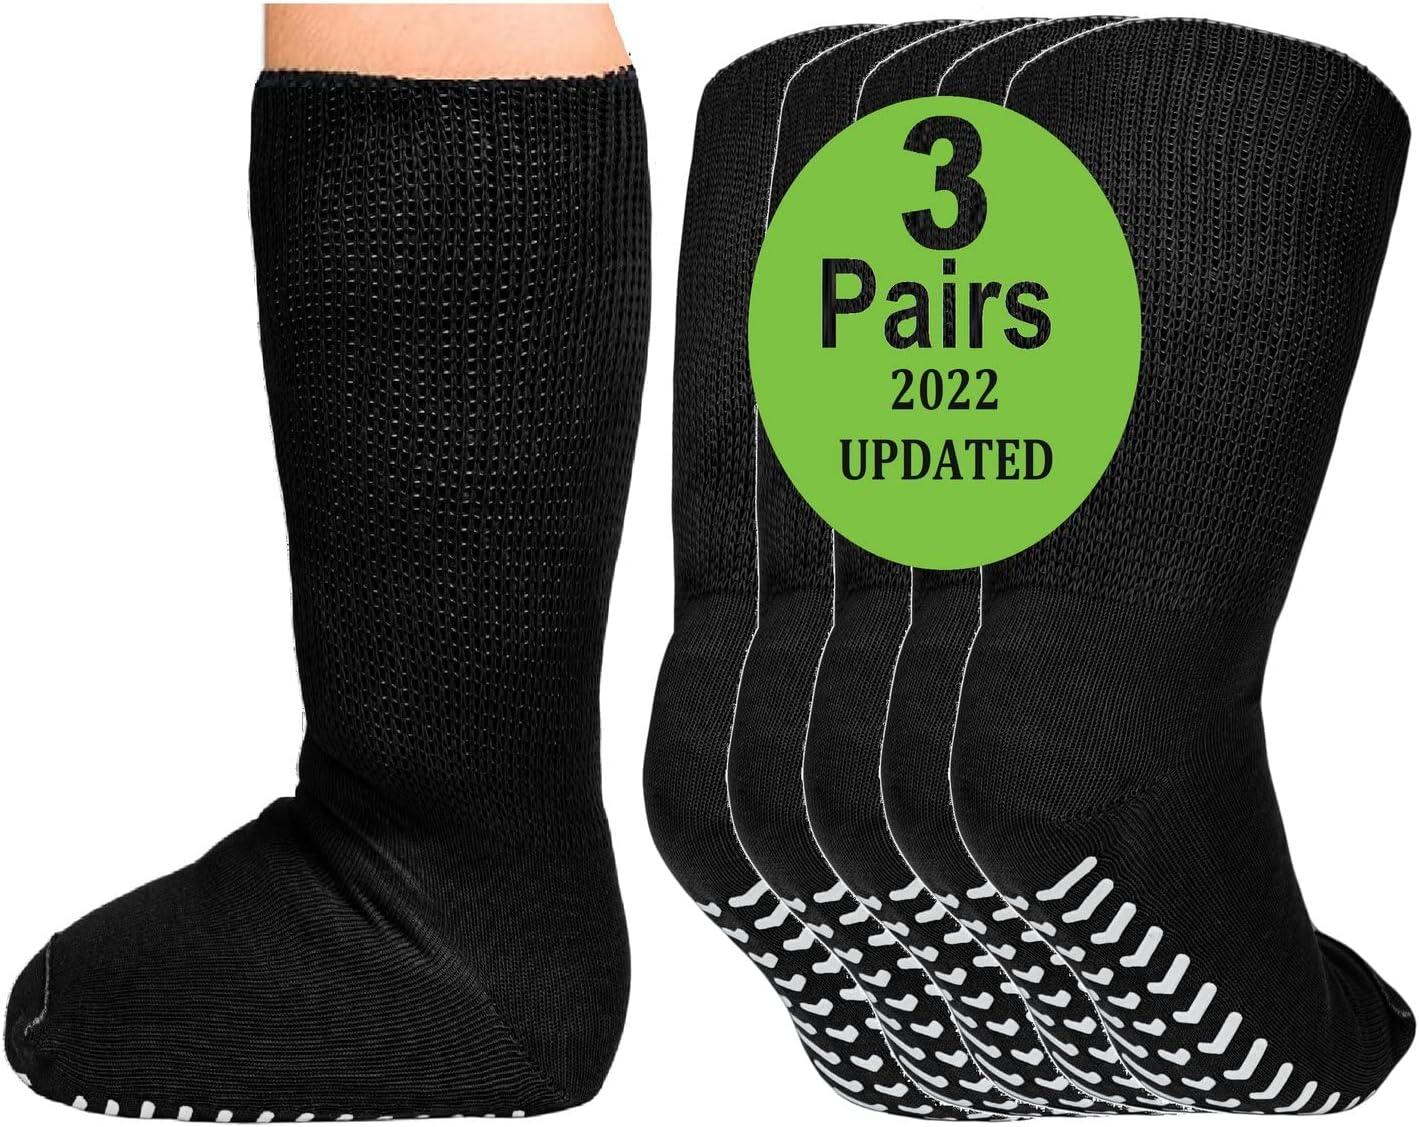 3 Pairs Extra Wide Bariatric Socks with Non Skid Grips for Edema